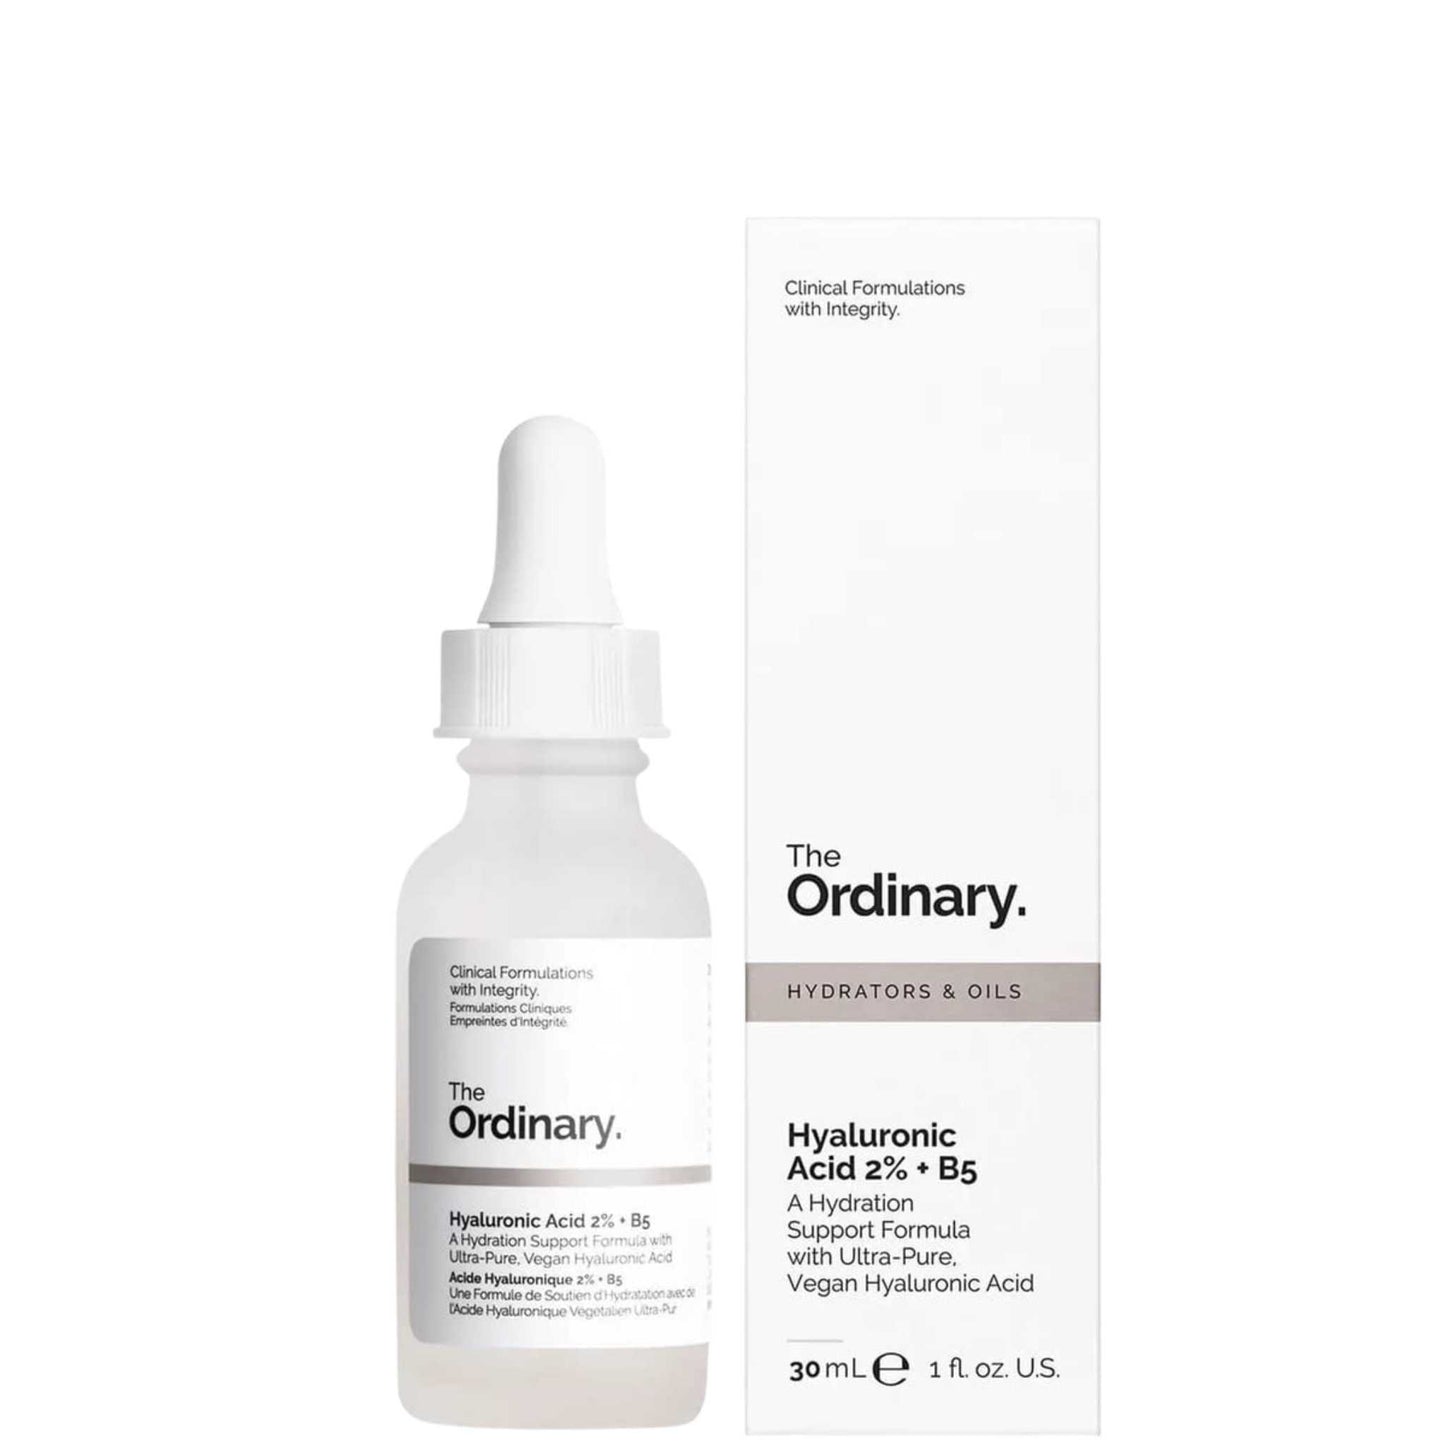 THE ORDINARY HYALURONIC ACID 2% +B5 The Ordinary